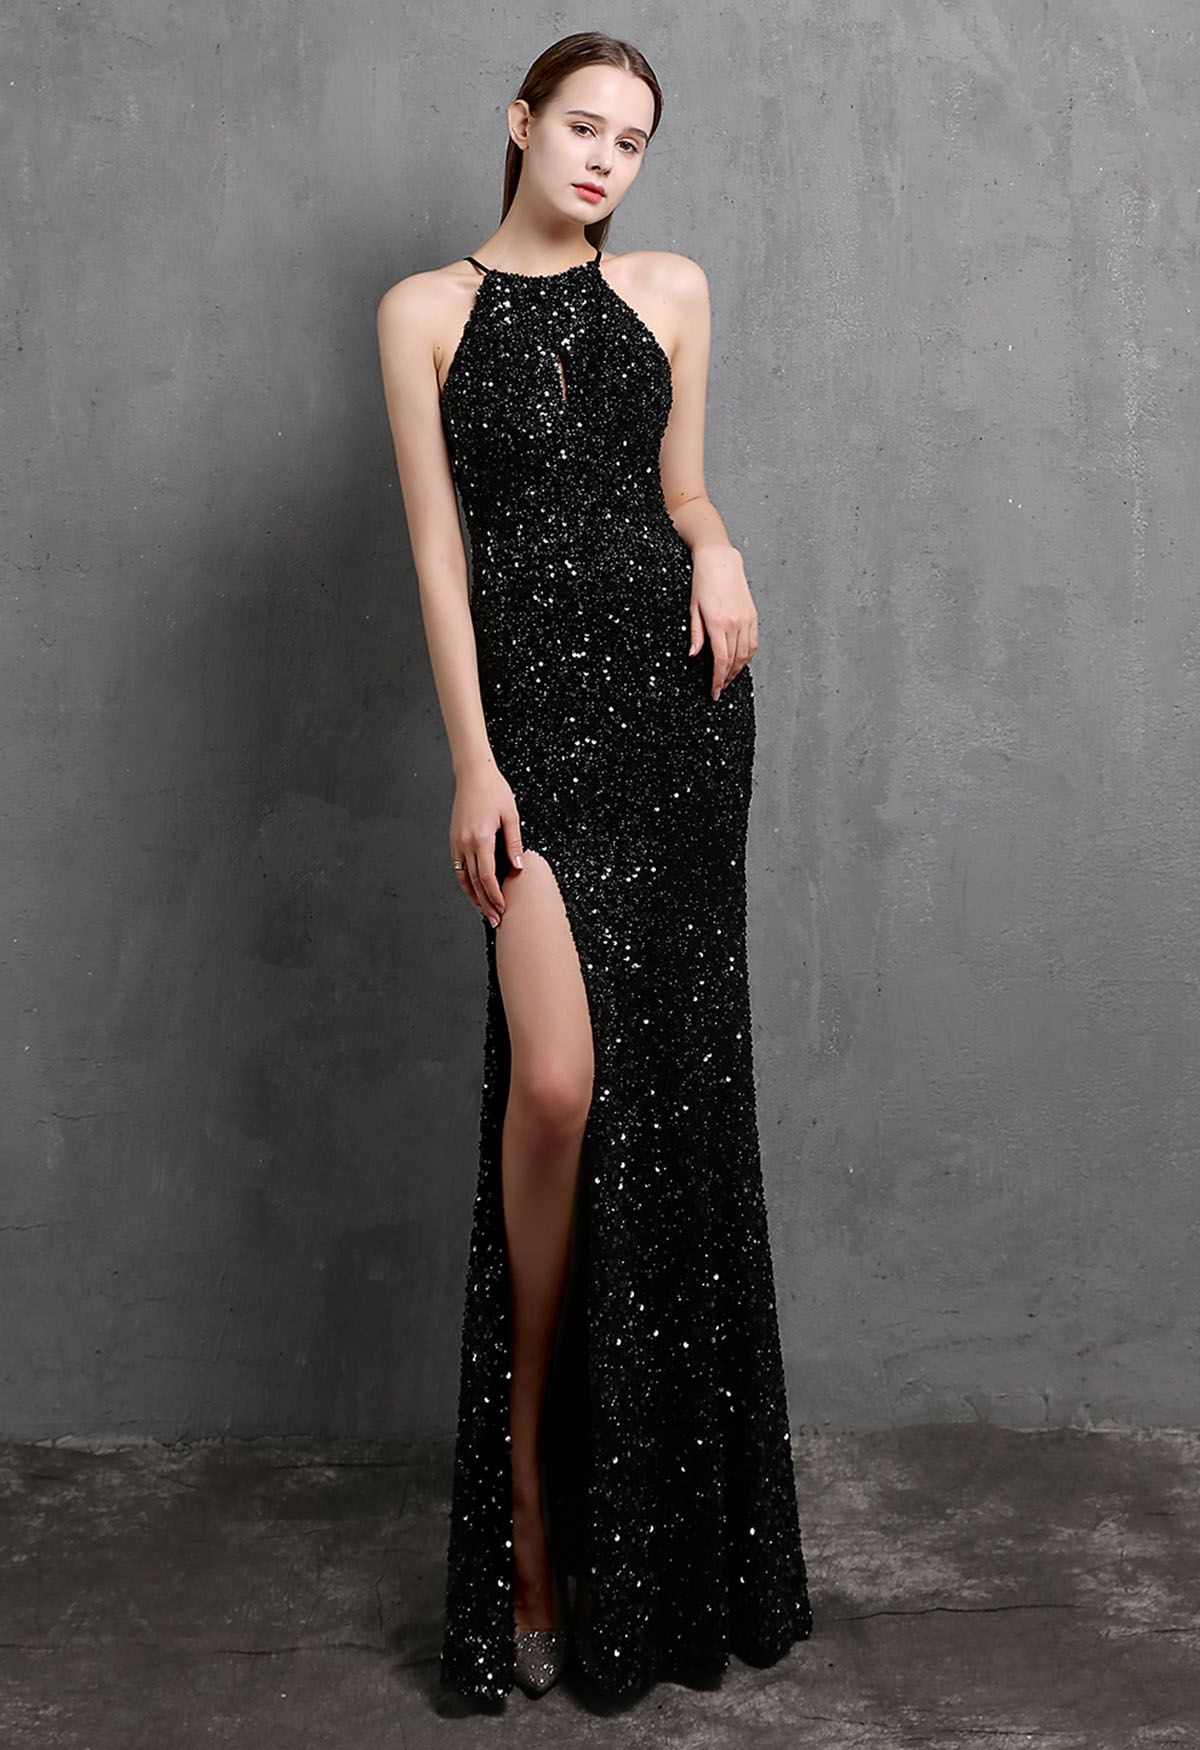 Halter Neck Cutout Sequined Slit Mermaid Gown in Black